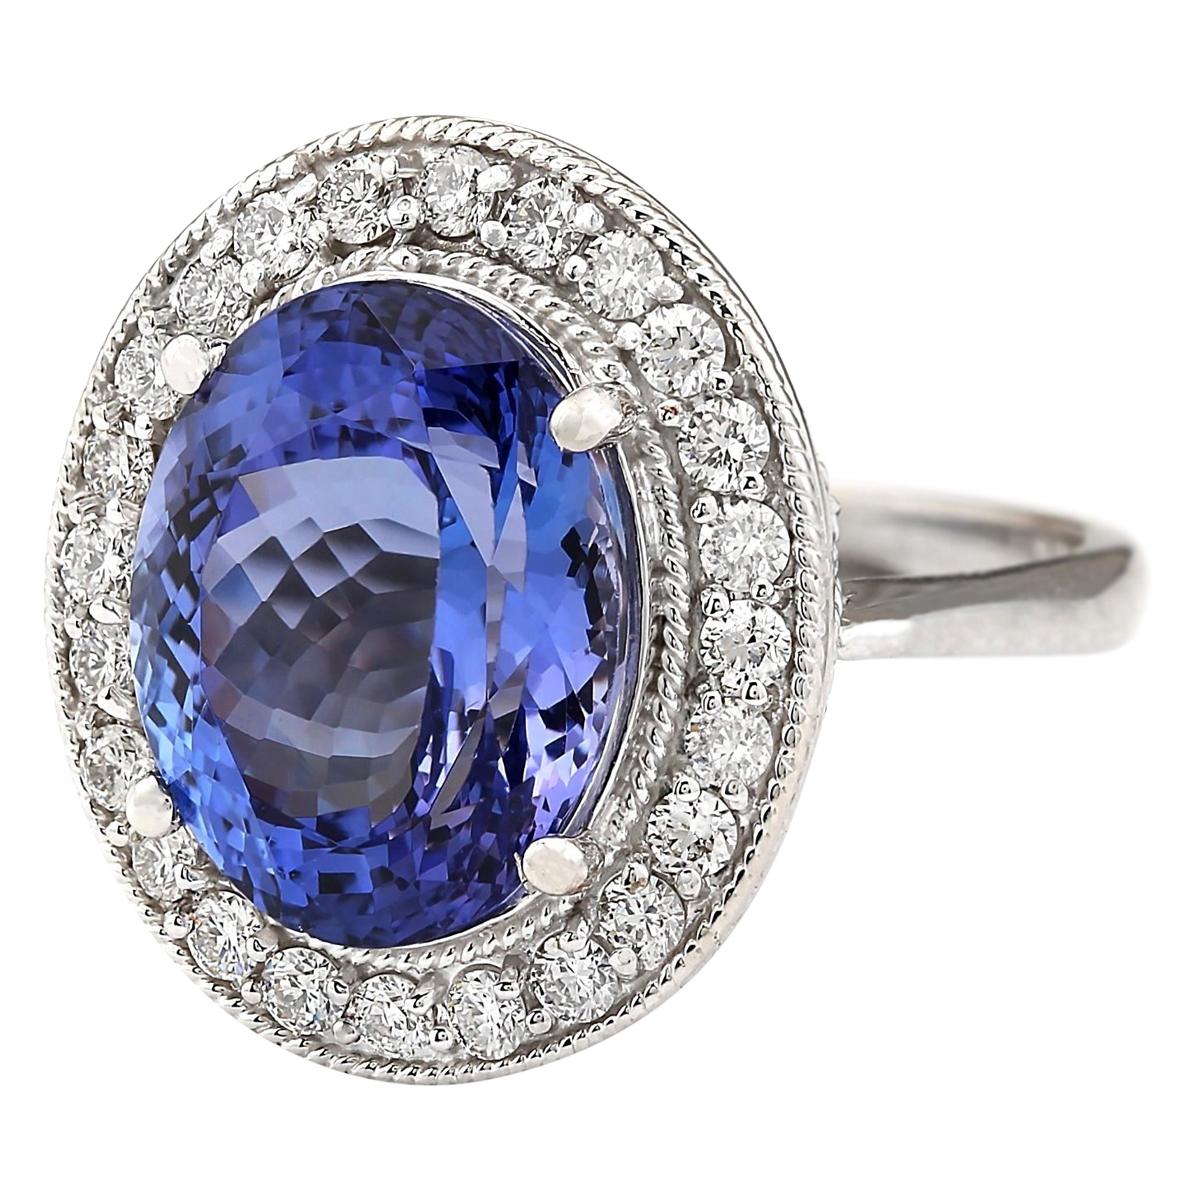 Introducing our extraordinary 14 Karat White Gold Diamond Ring featuring a remarkable 10.11 Carat Tanzanite as its focal point. Stamped with authenticity, this ring embodies elegance and sophistication. With a total weight of 8.3 grams, it showcases